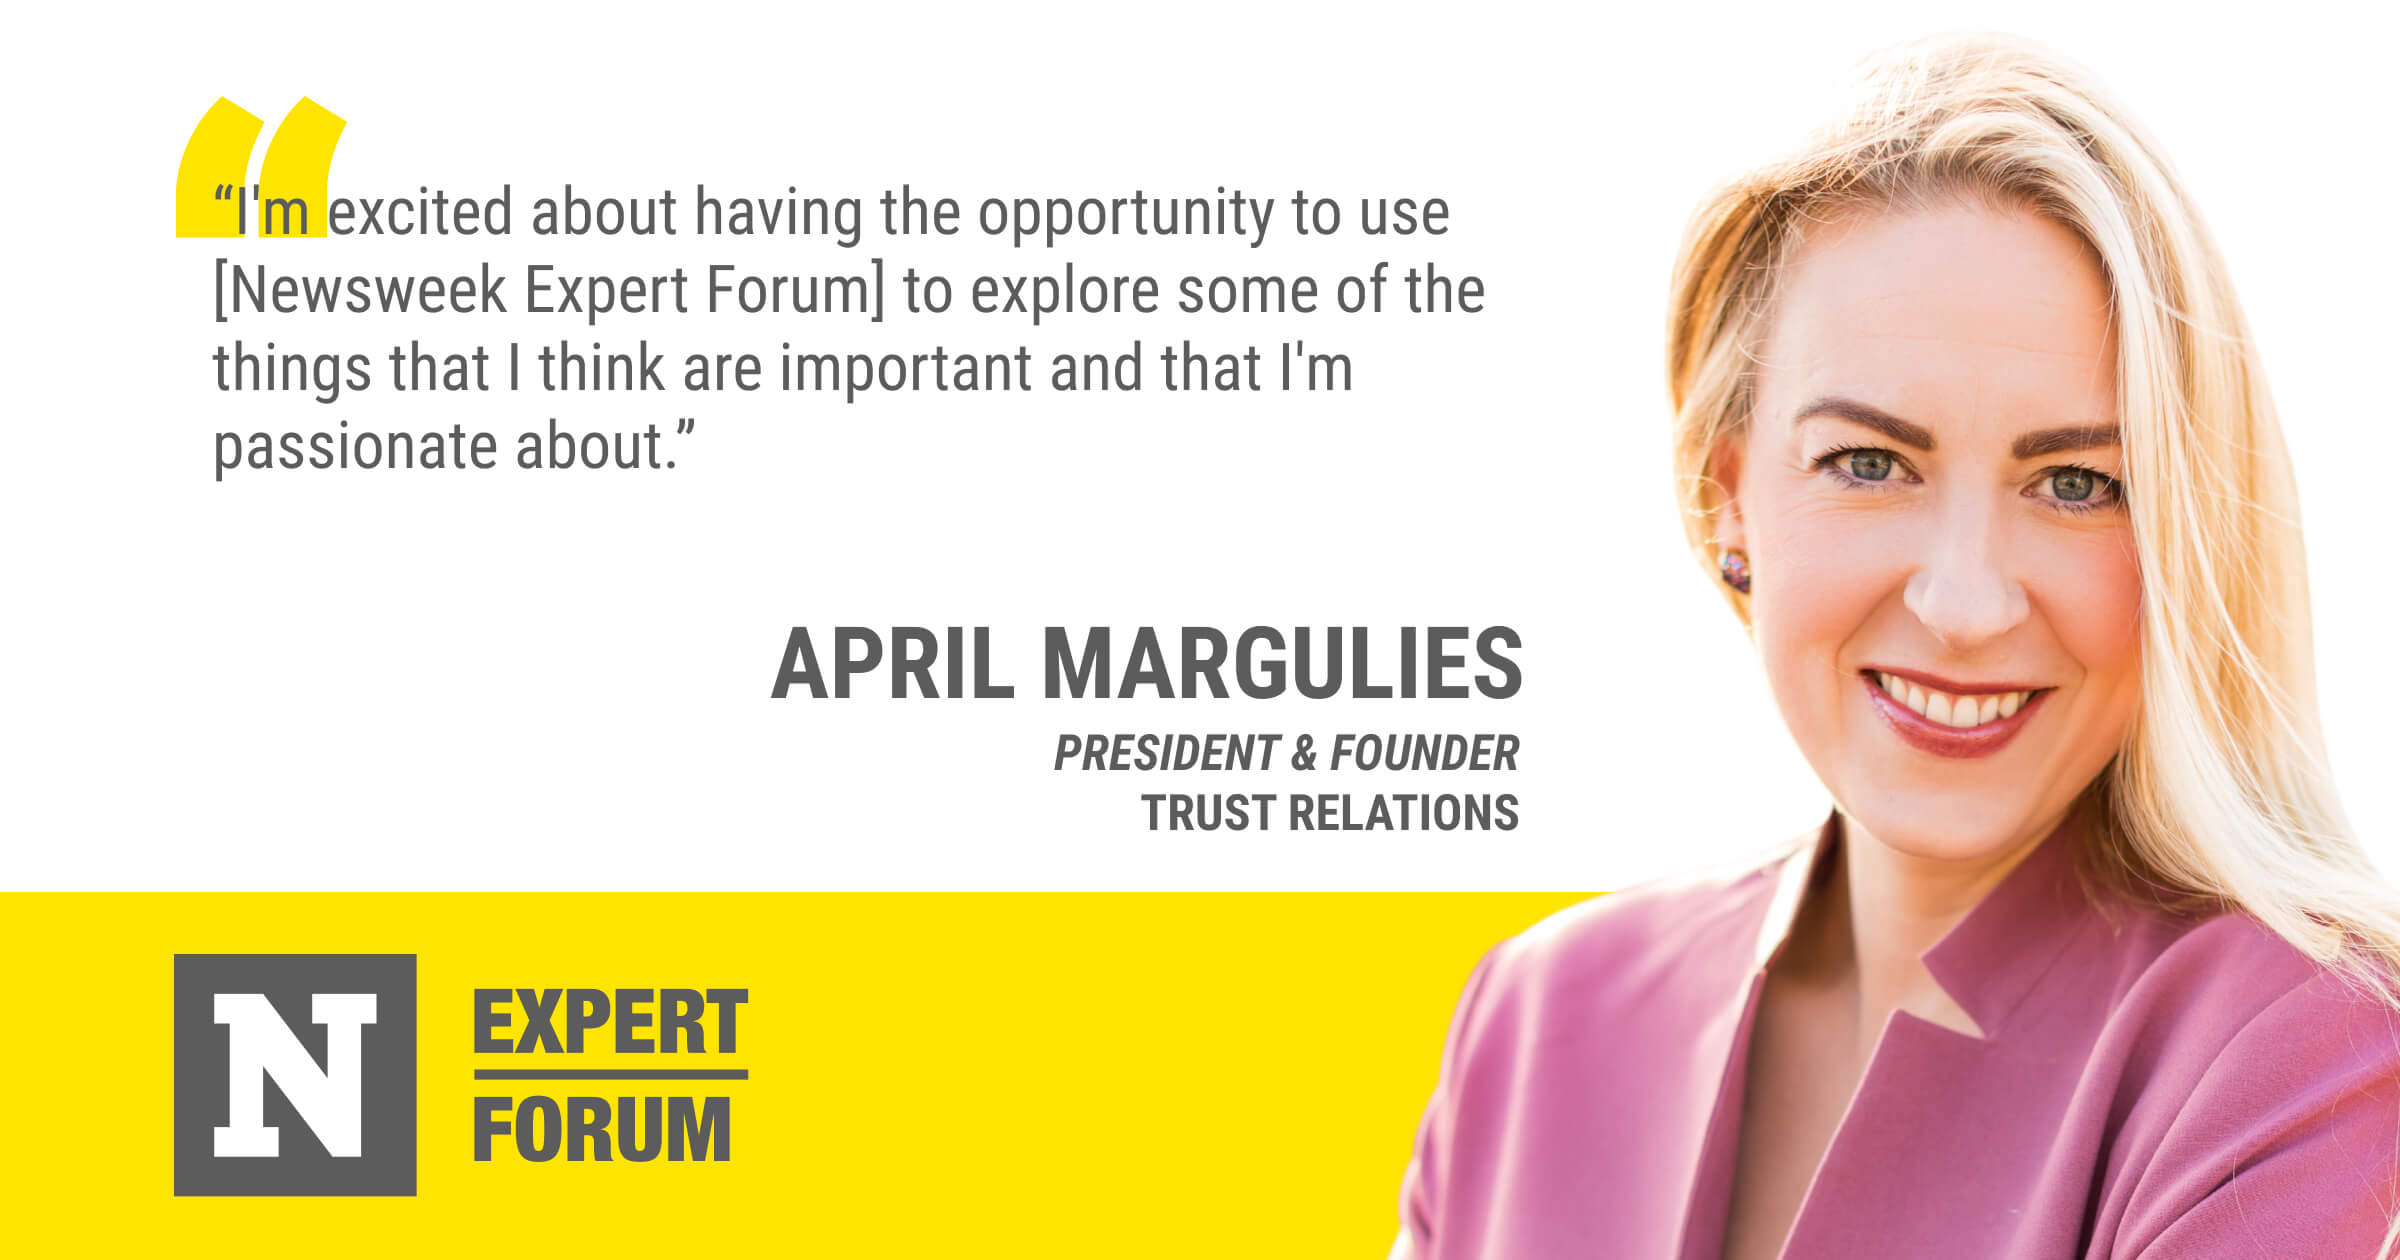 Through Newsweek Expert Forum, April Margulies Explores Her Voice As a Thought Leader